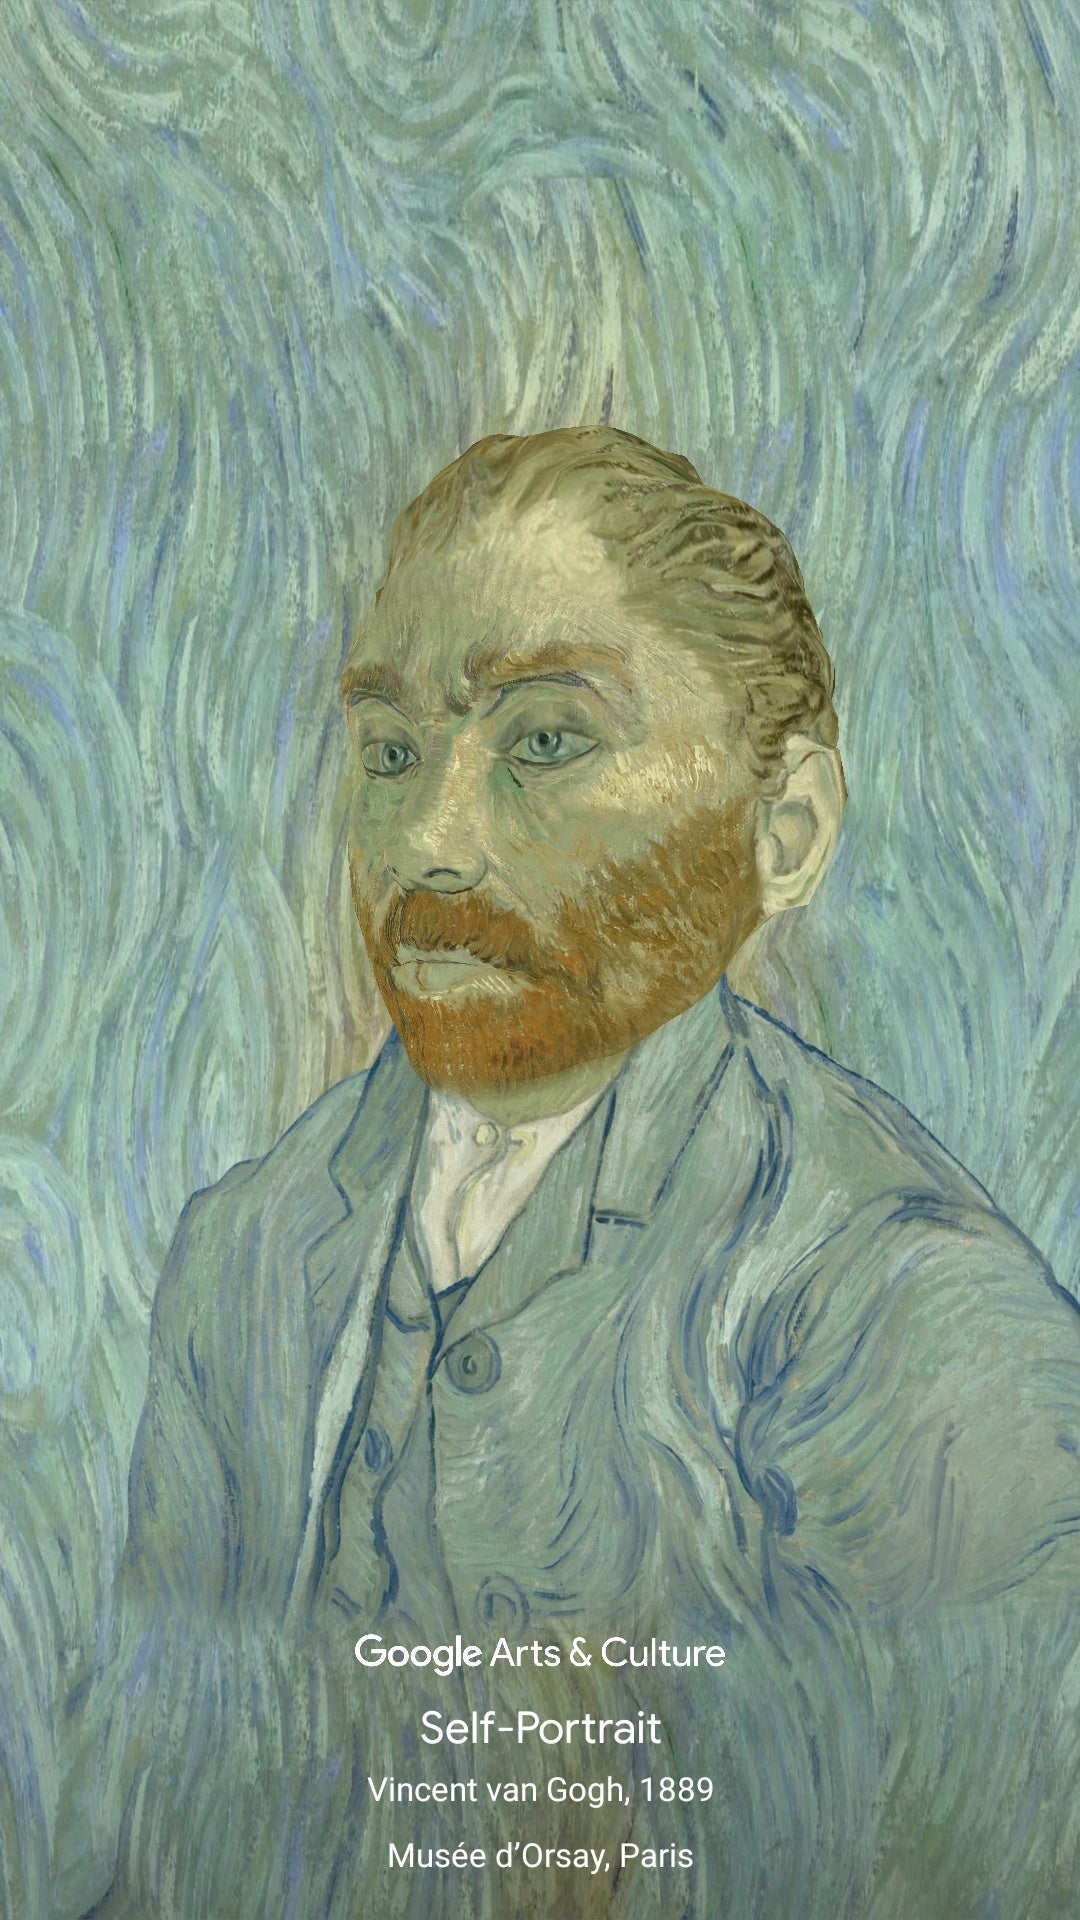 The filter places you into Van Gogh's iconic self-portrait - Have Van Gogh draw your portrait: Google launches Art Filters